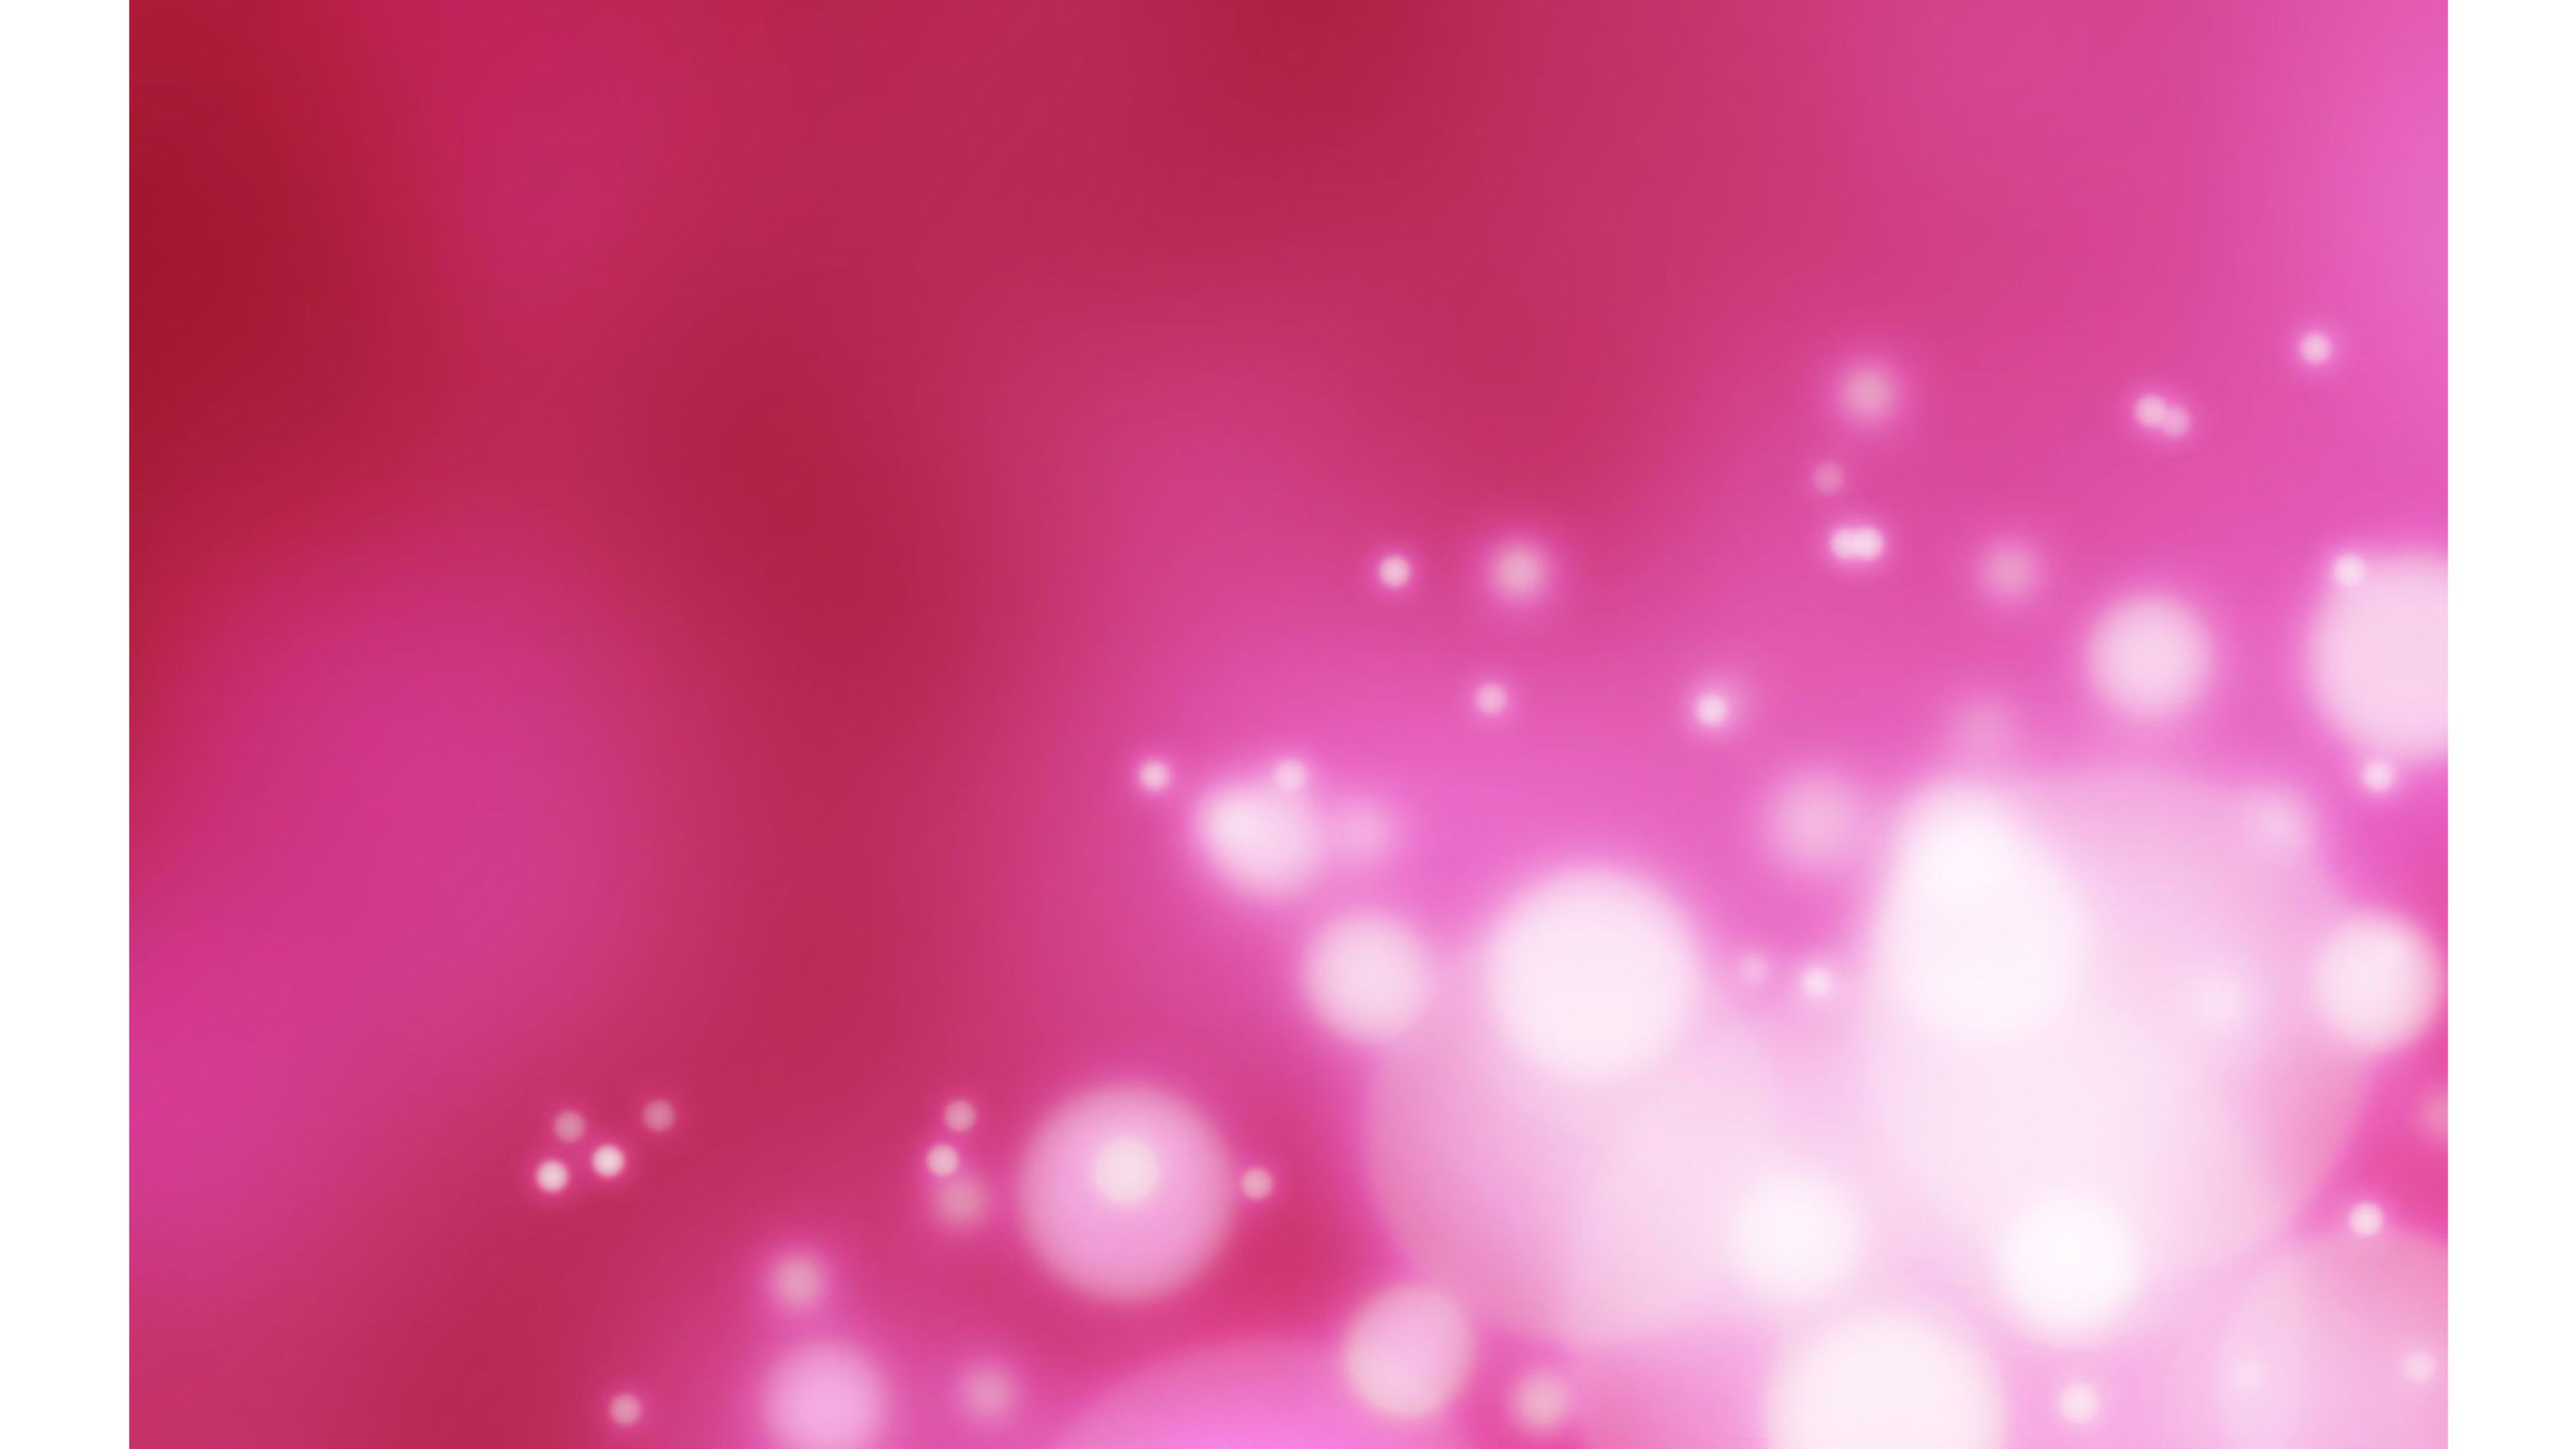 Hot Pink Abstract Wallpapers on WallpaperDog